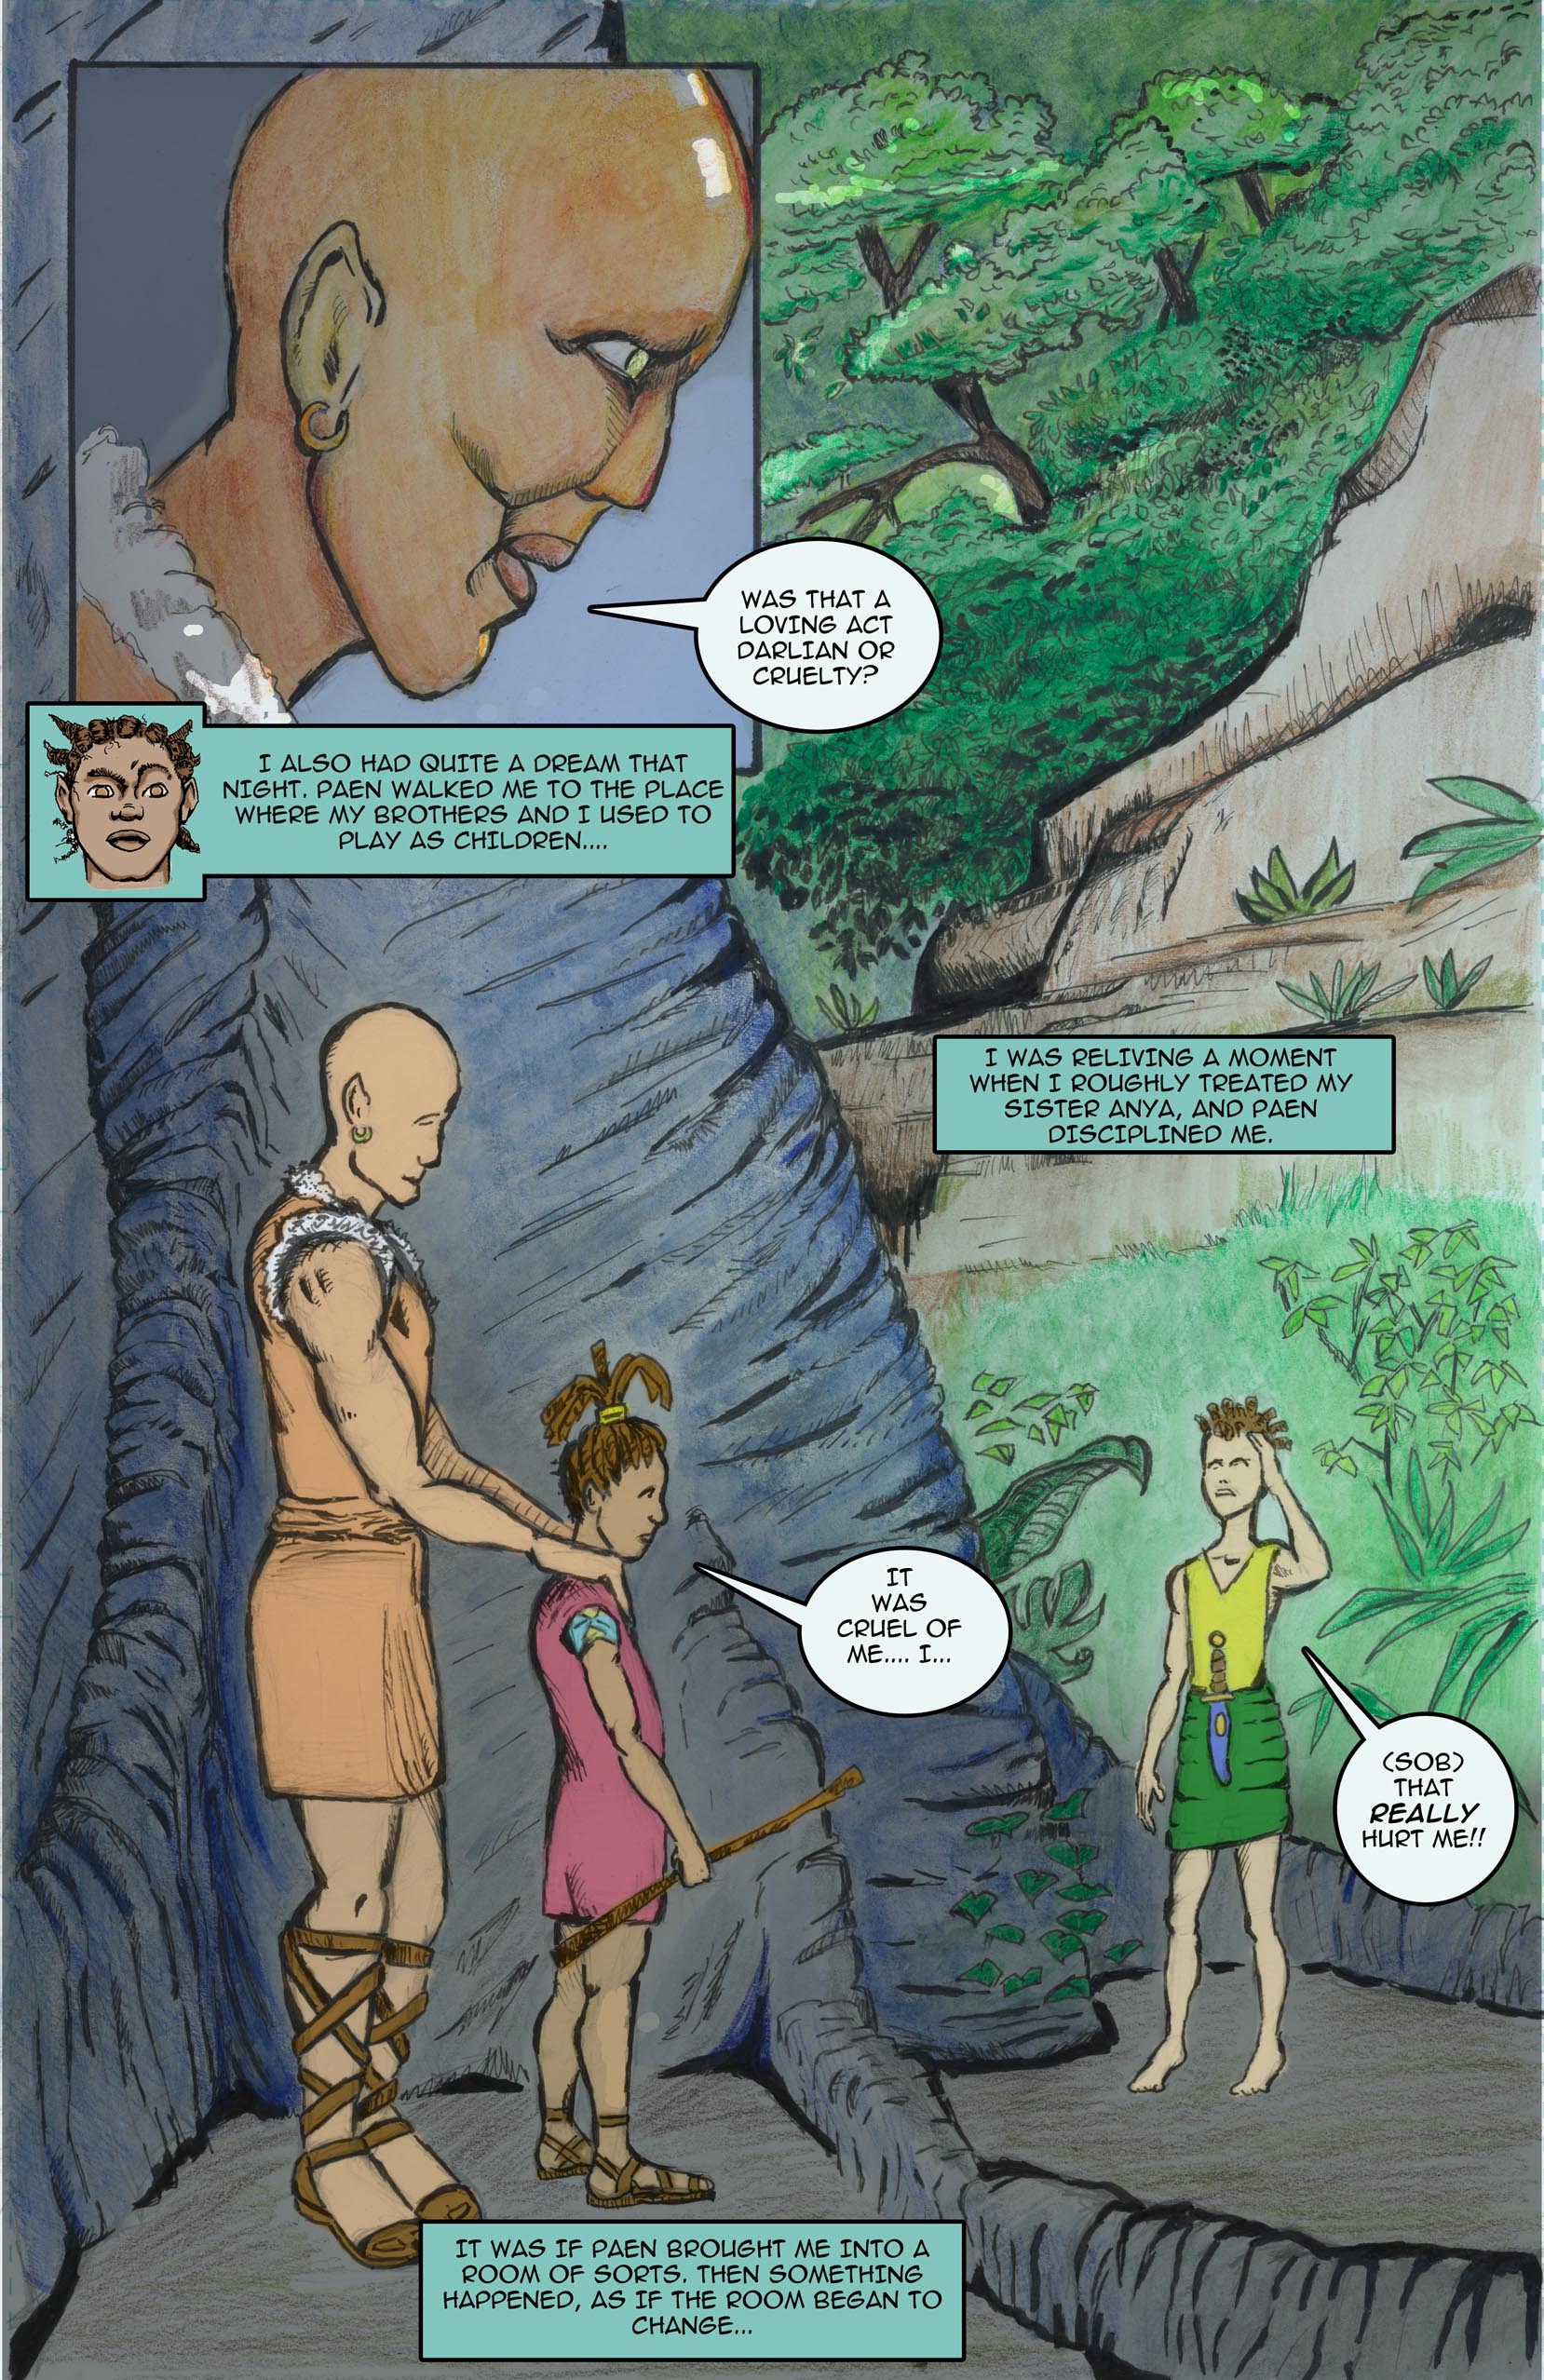 Dreamers of the Great One Land (page 33)